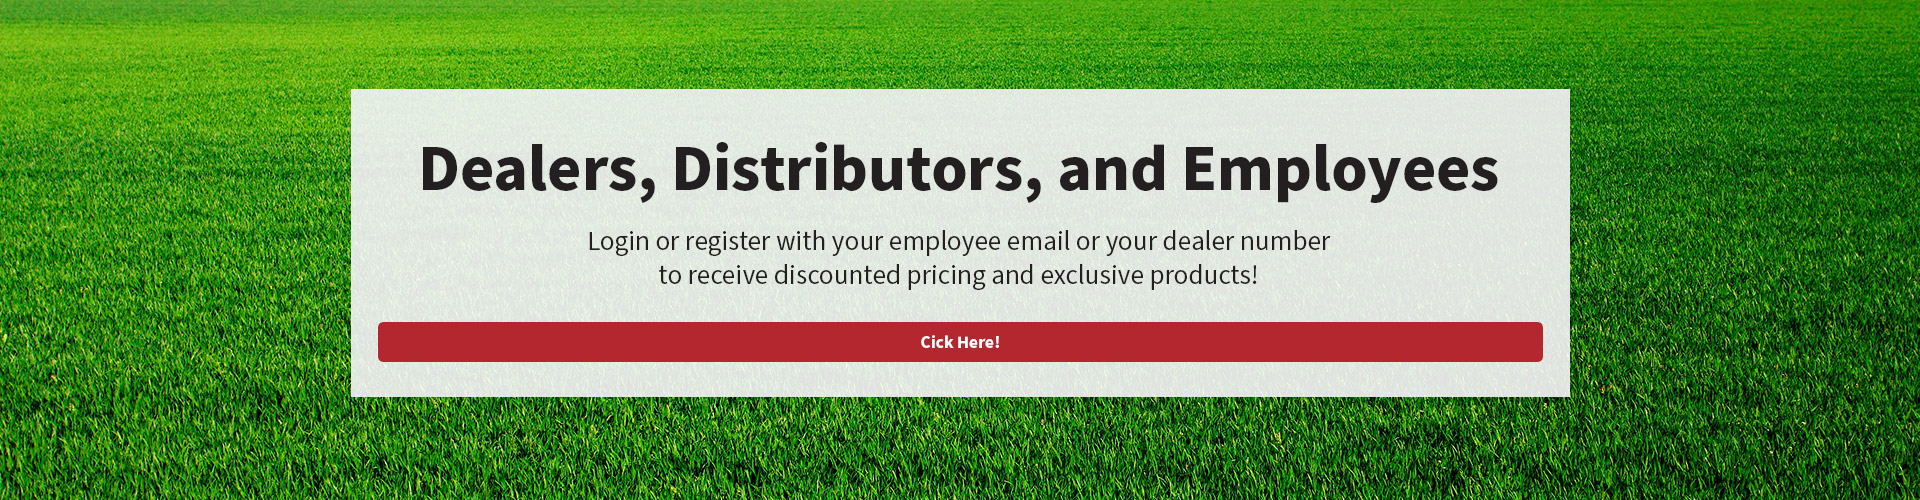 Dealers, Distributors, and Employees - Login or register with your employee email or your dealer number to receive discounted pricing and exclusive products!